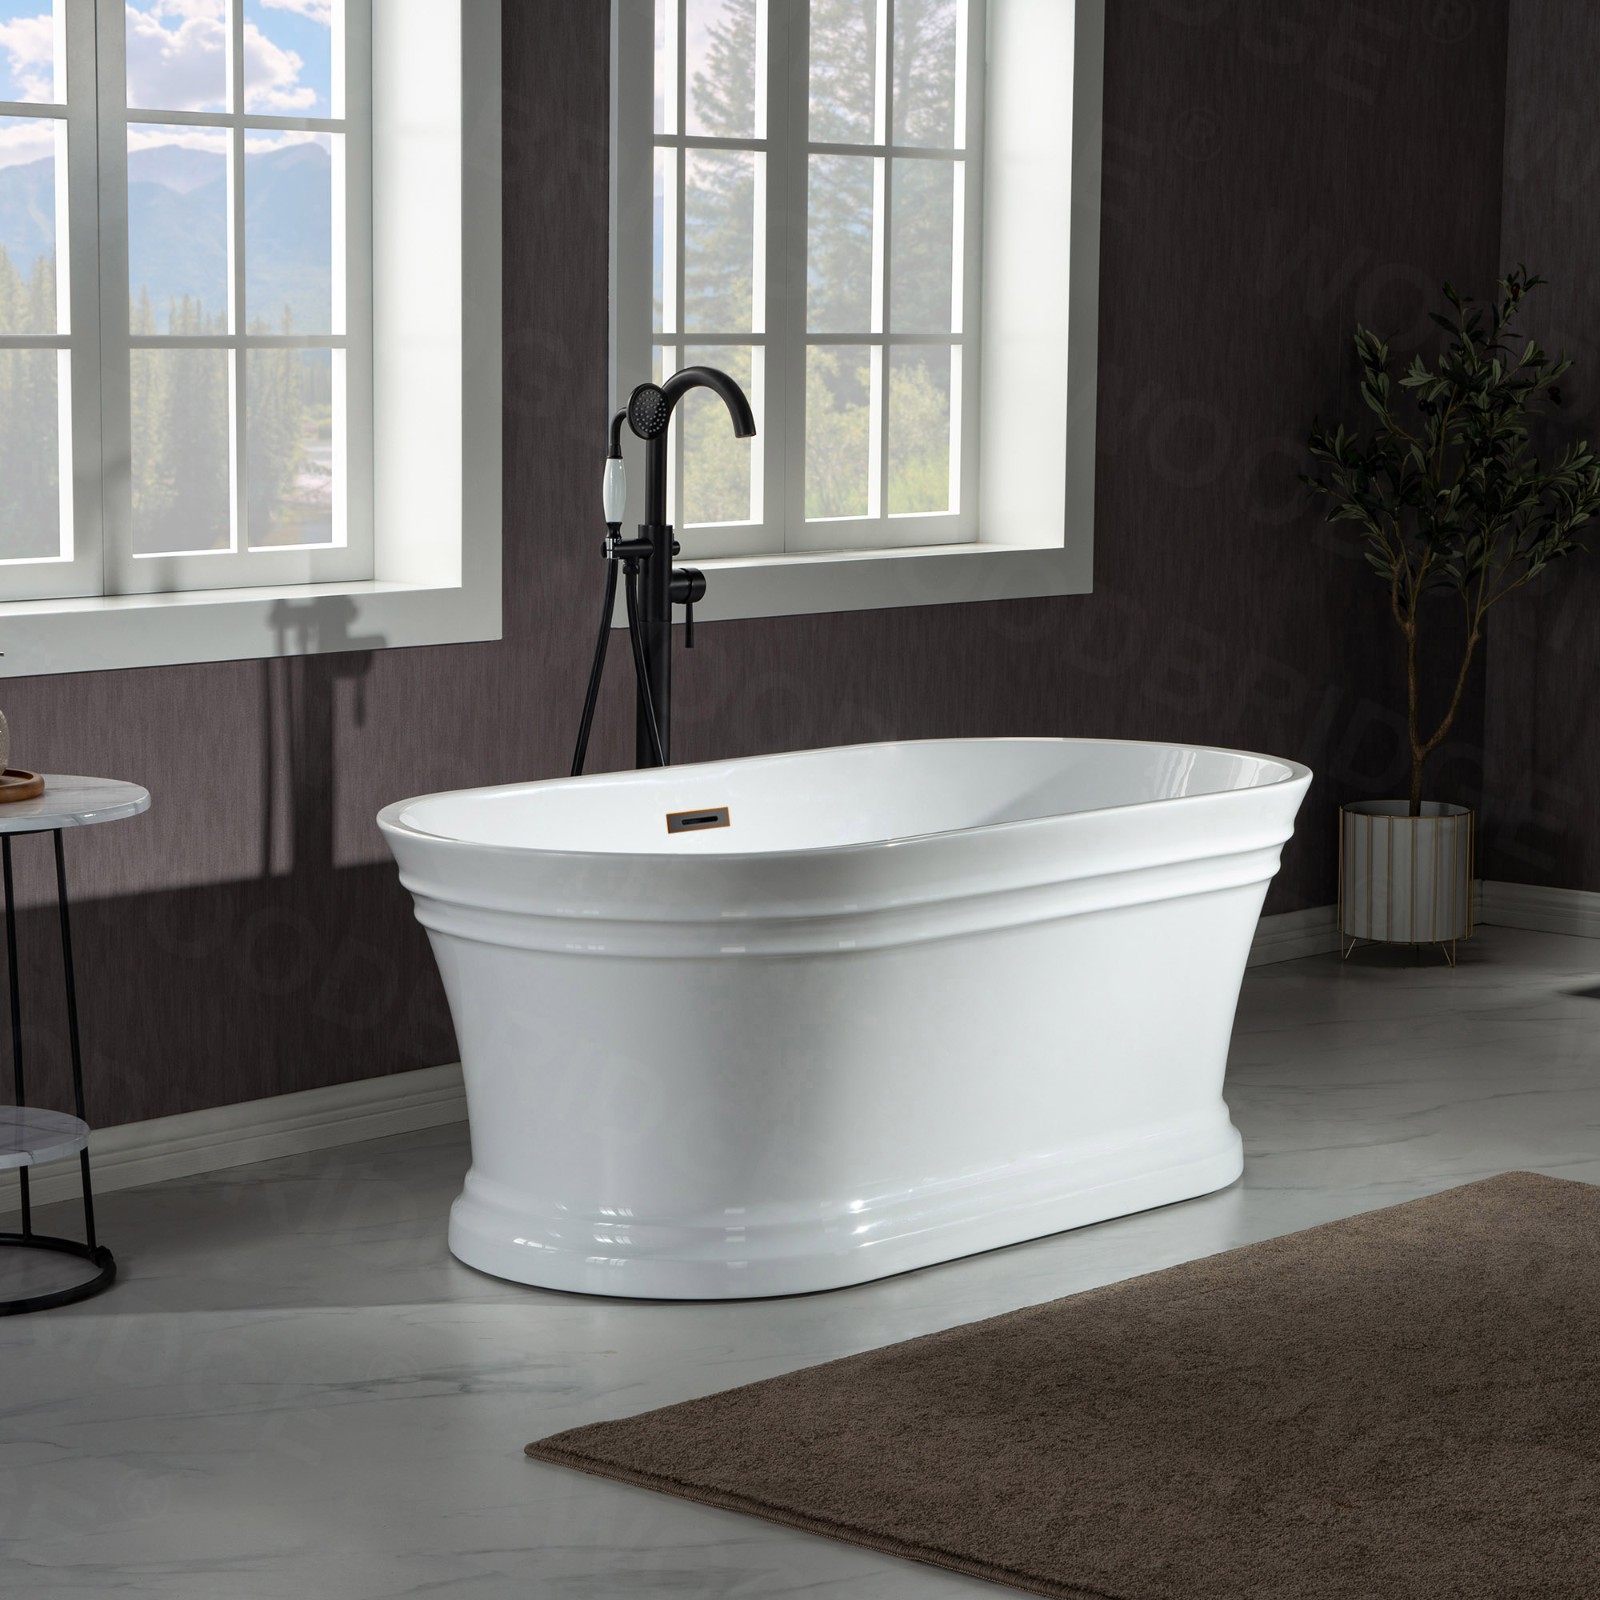  WOODBRIDGE 59 in. Freestanding Double Ended Acrylic Soaking Bathtub with Center Drain Assembly and Overflow, BTA1536/B1536, Glossy White_7776